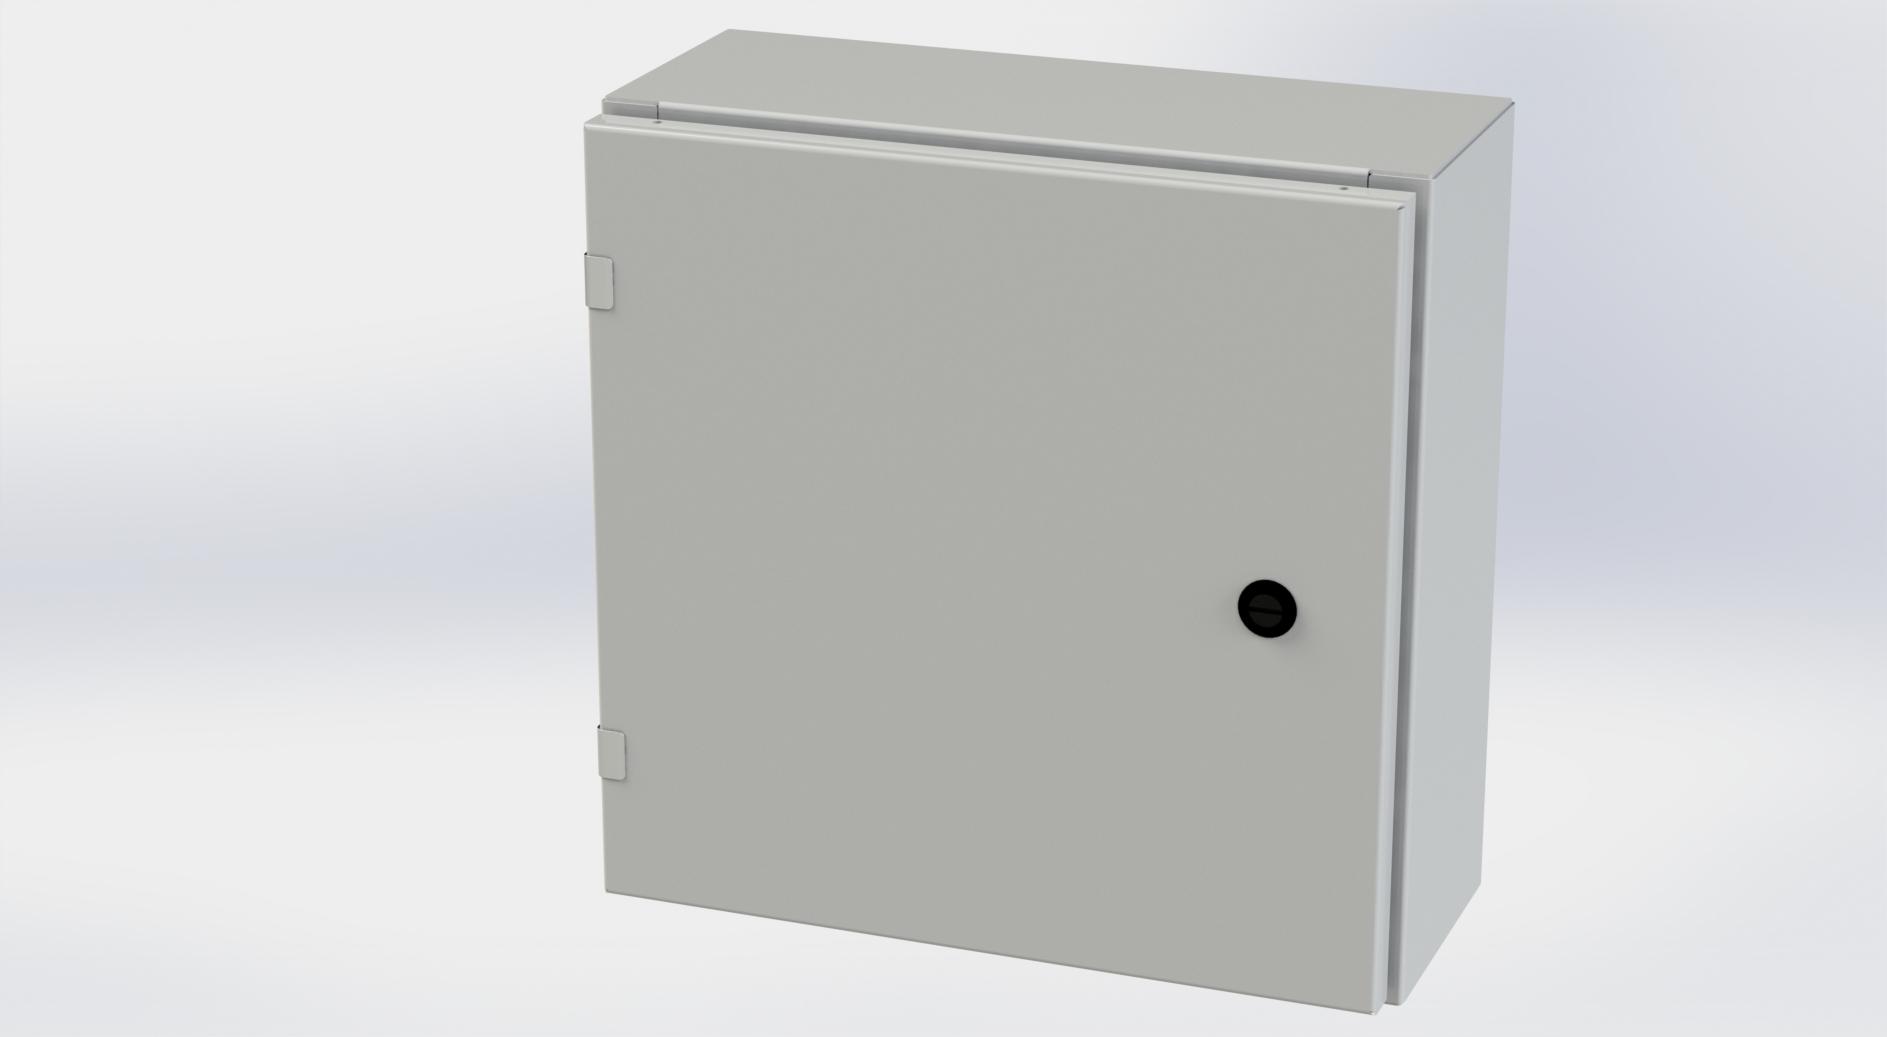 Saginaw Control SCE-16EL1606LPLG EL Enclosure, Height:16.00", Width:16.00", Depth:6.00", RAL 7035 gray powder coating inside and out. Optional sub-panels are powder coated white.